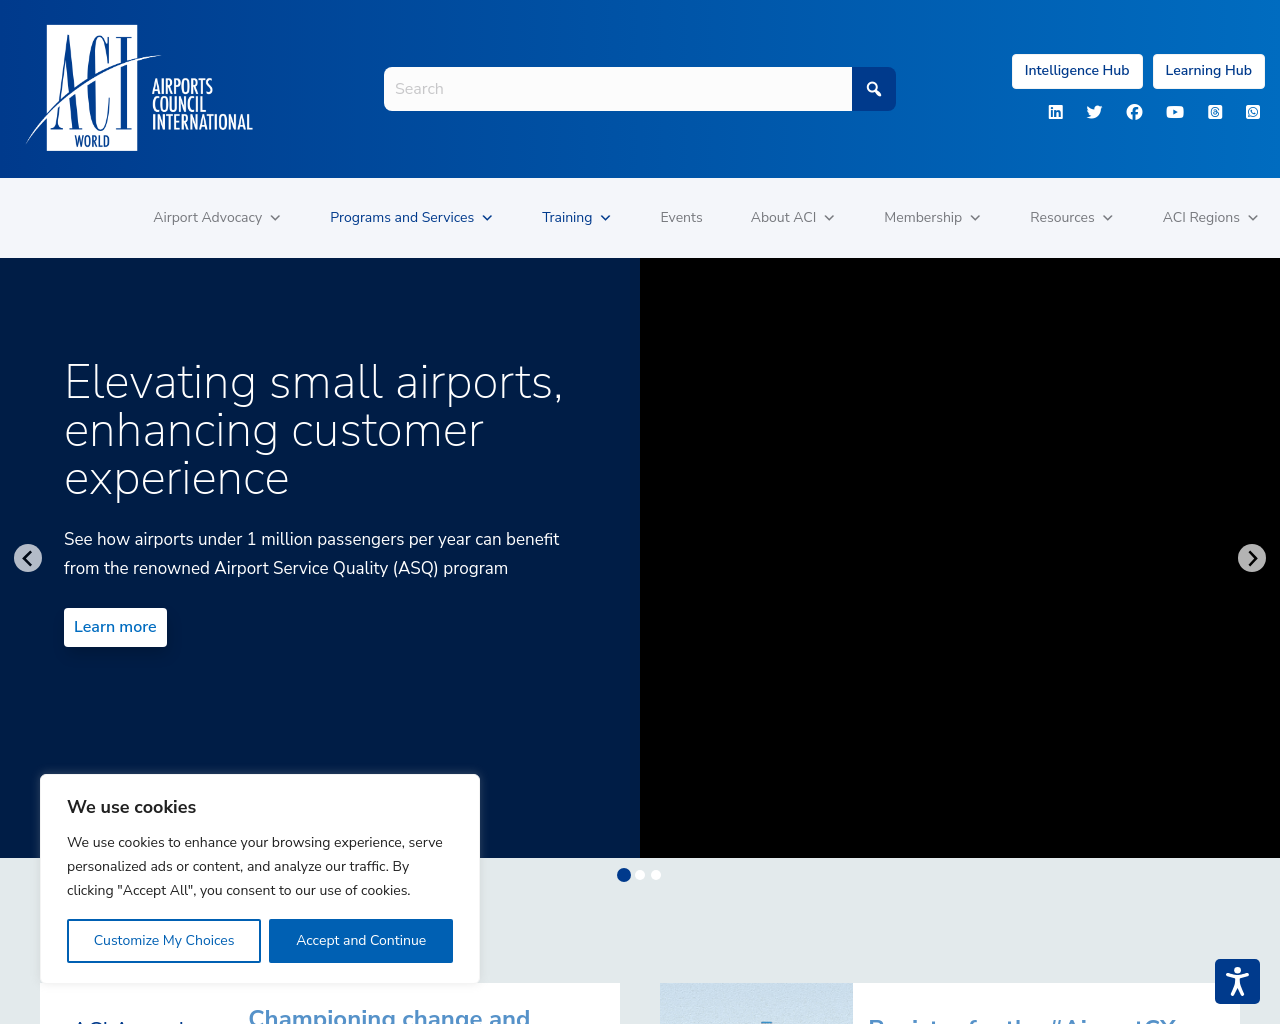 airports.org